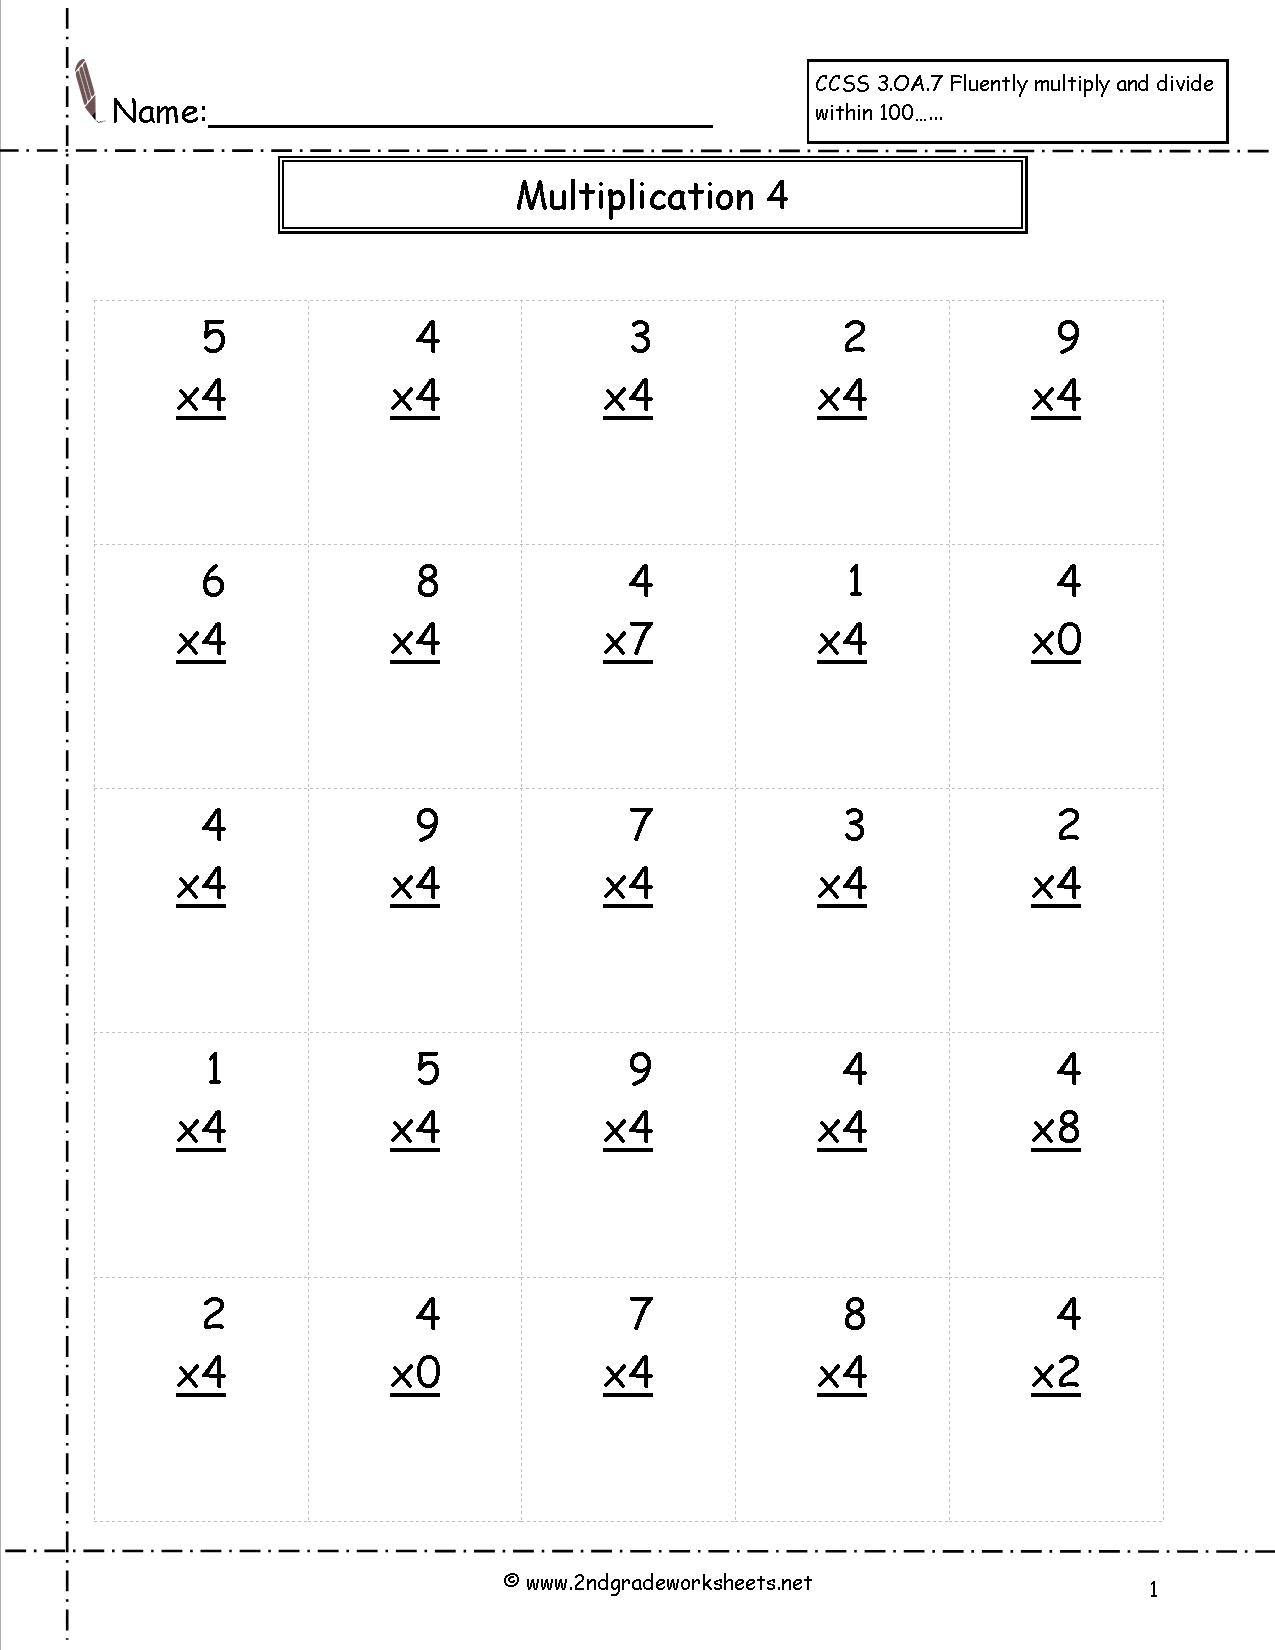 Multiplication Worksheets And Printouts with regard to Printable Multiplication Worksheets 4's